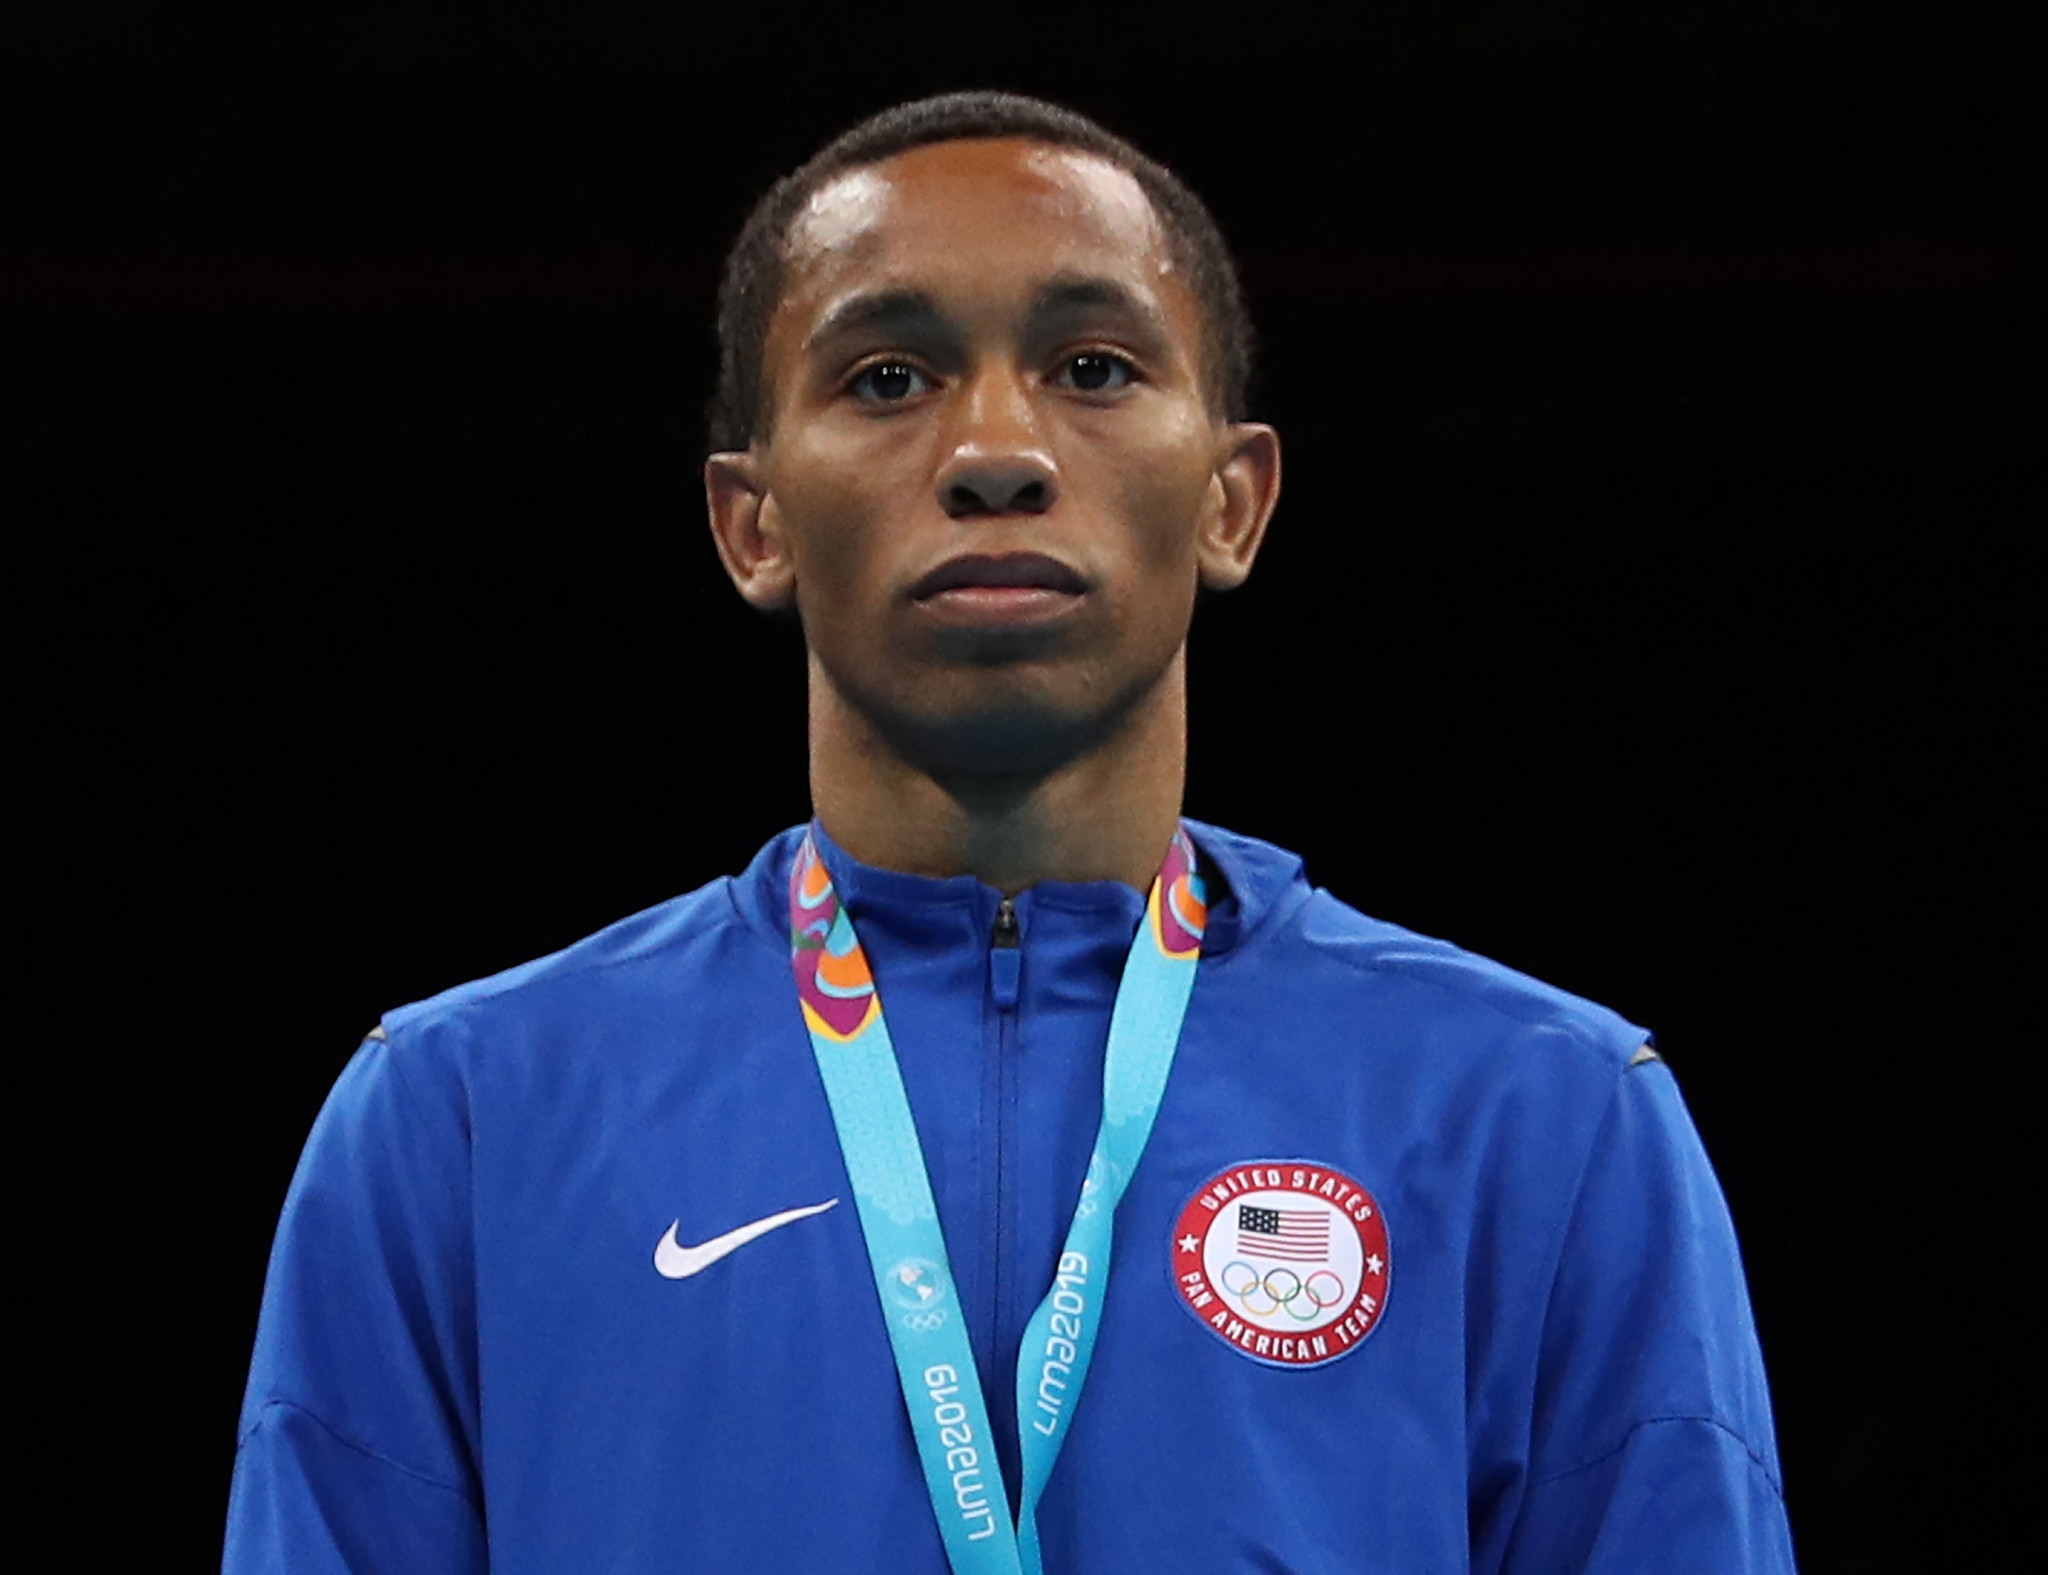 World Championship silver medallist joins professional boxing ranks after Tokyo 2020 delay